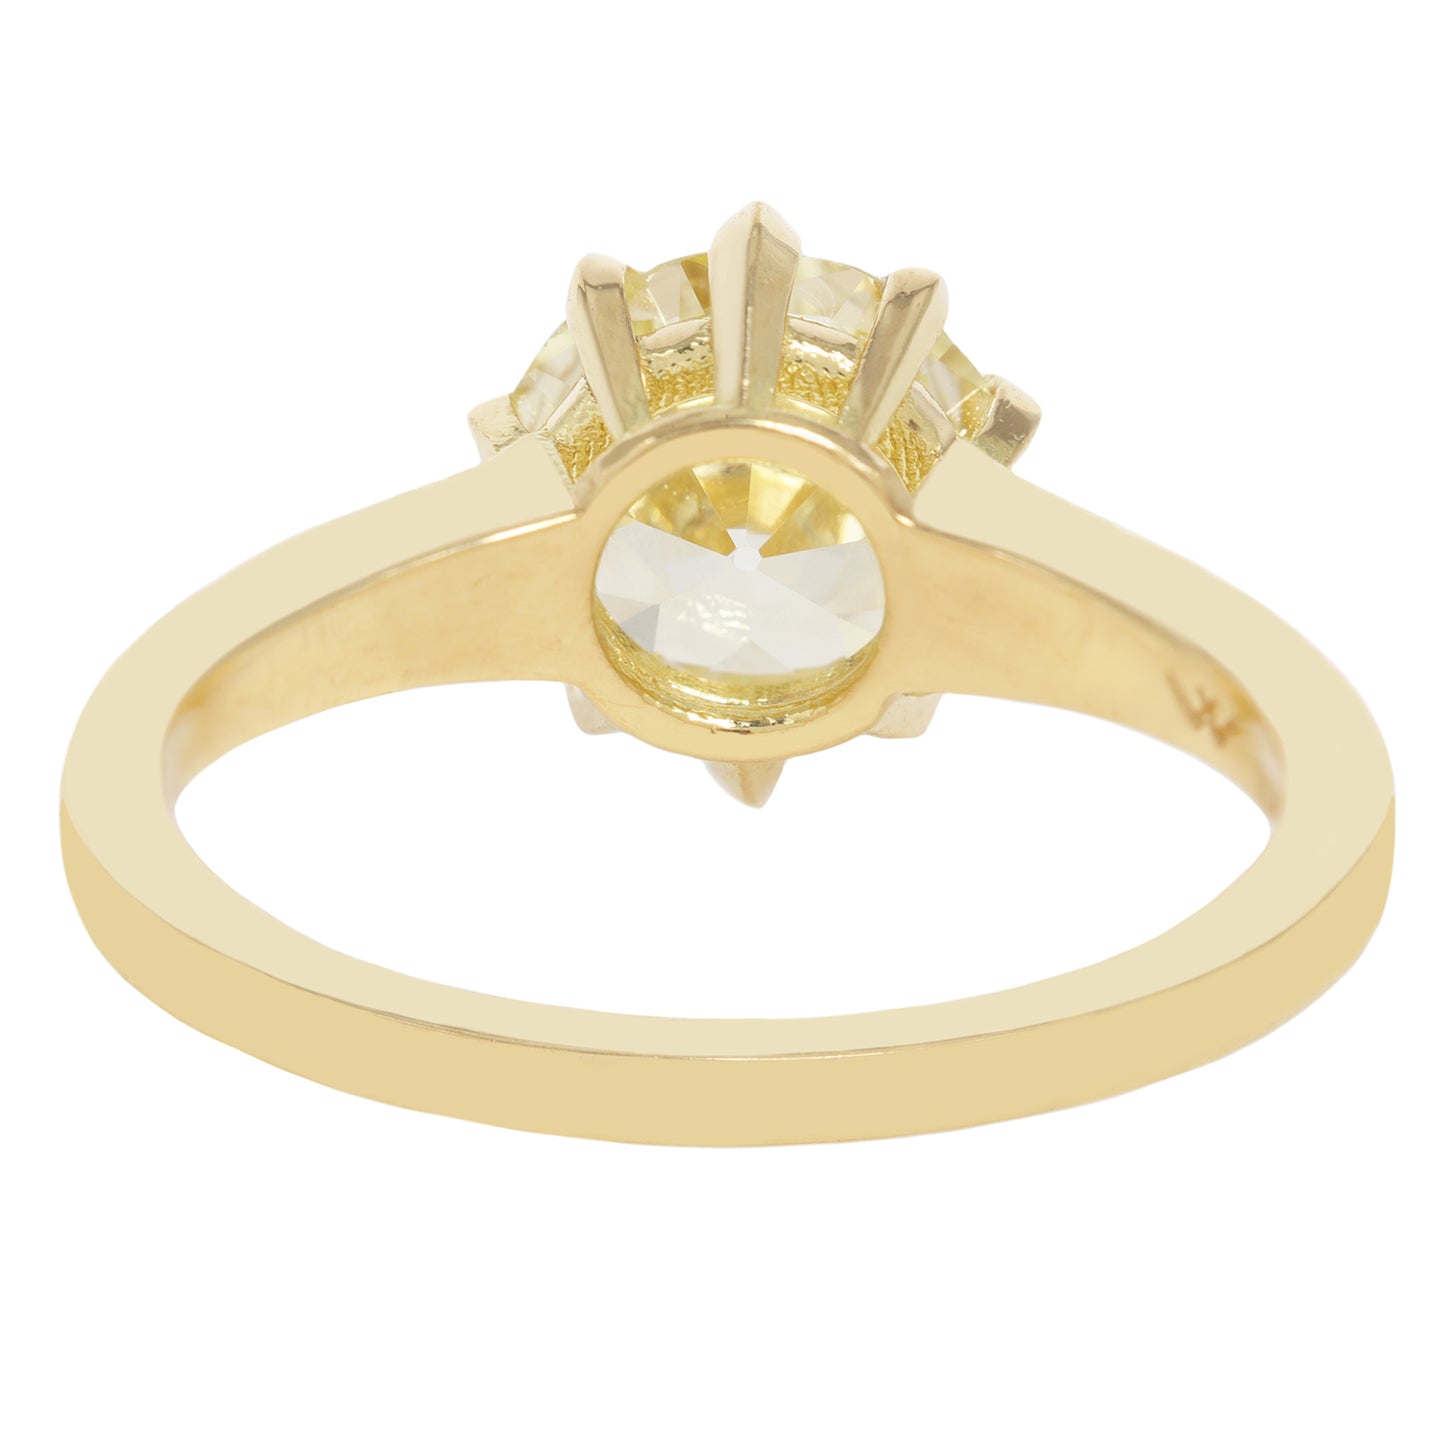 Lucent Diamond Solitaire Ring